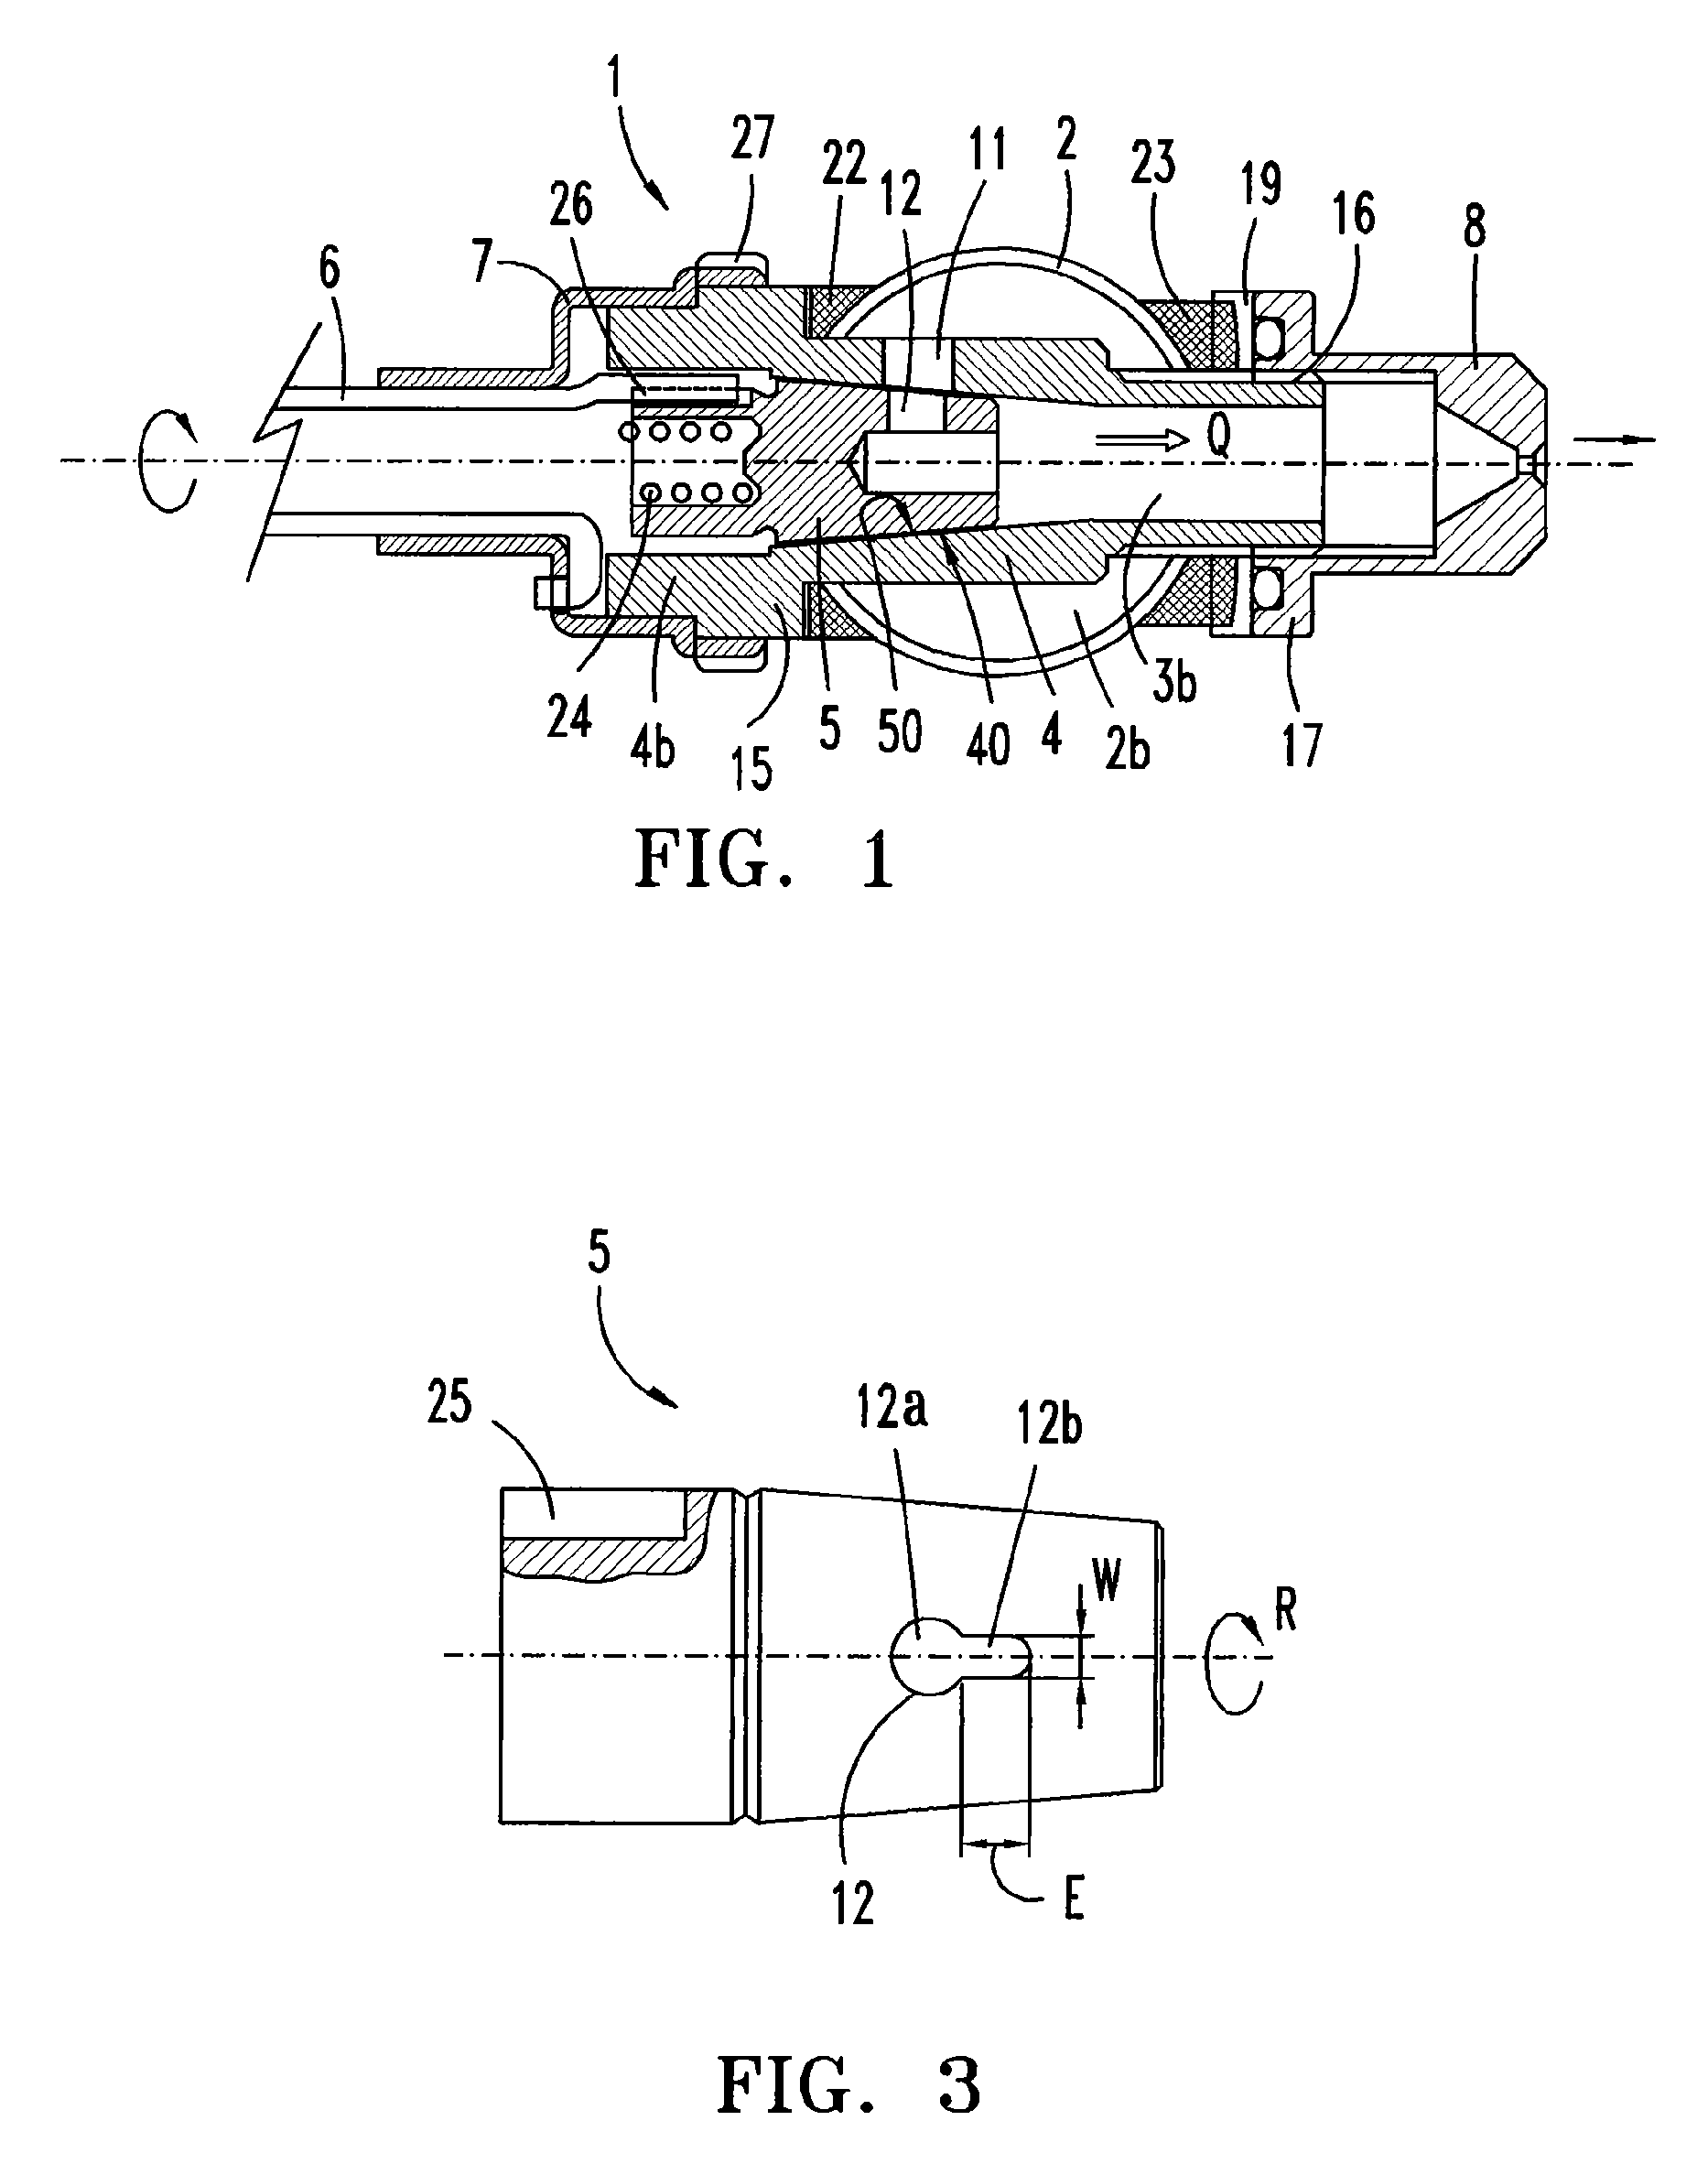 Device for distributing gas to a cooking appliance